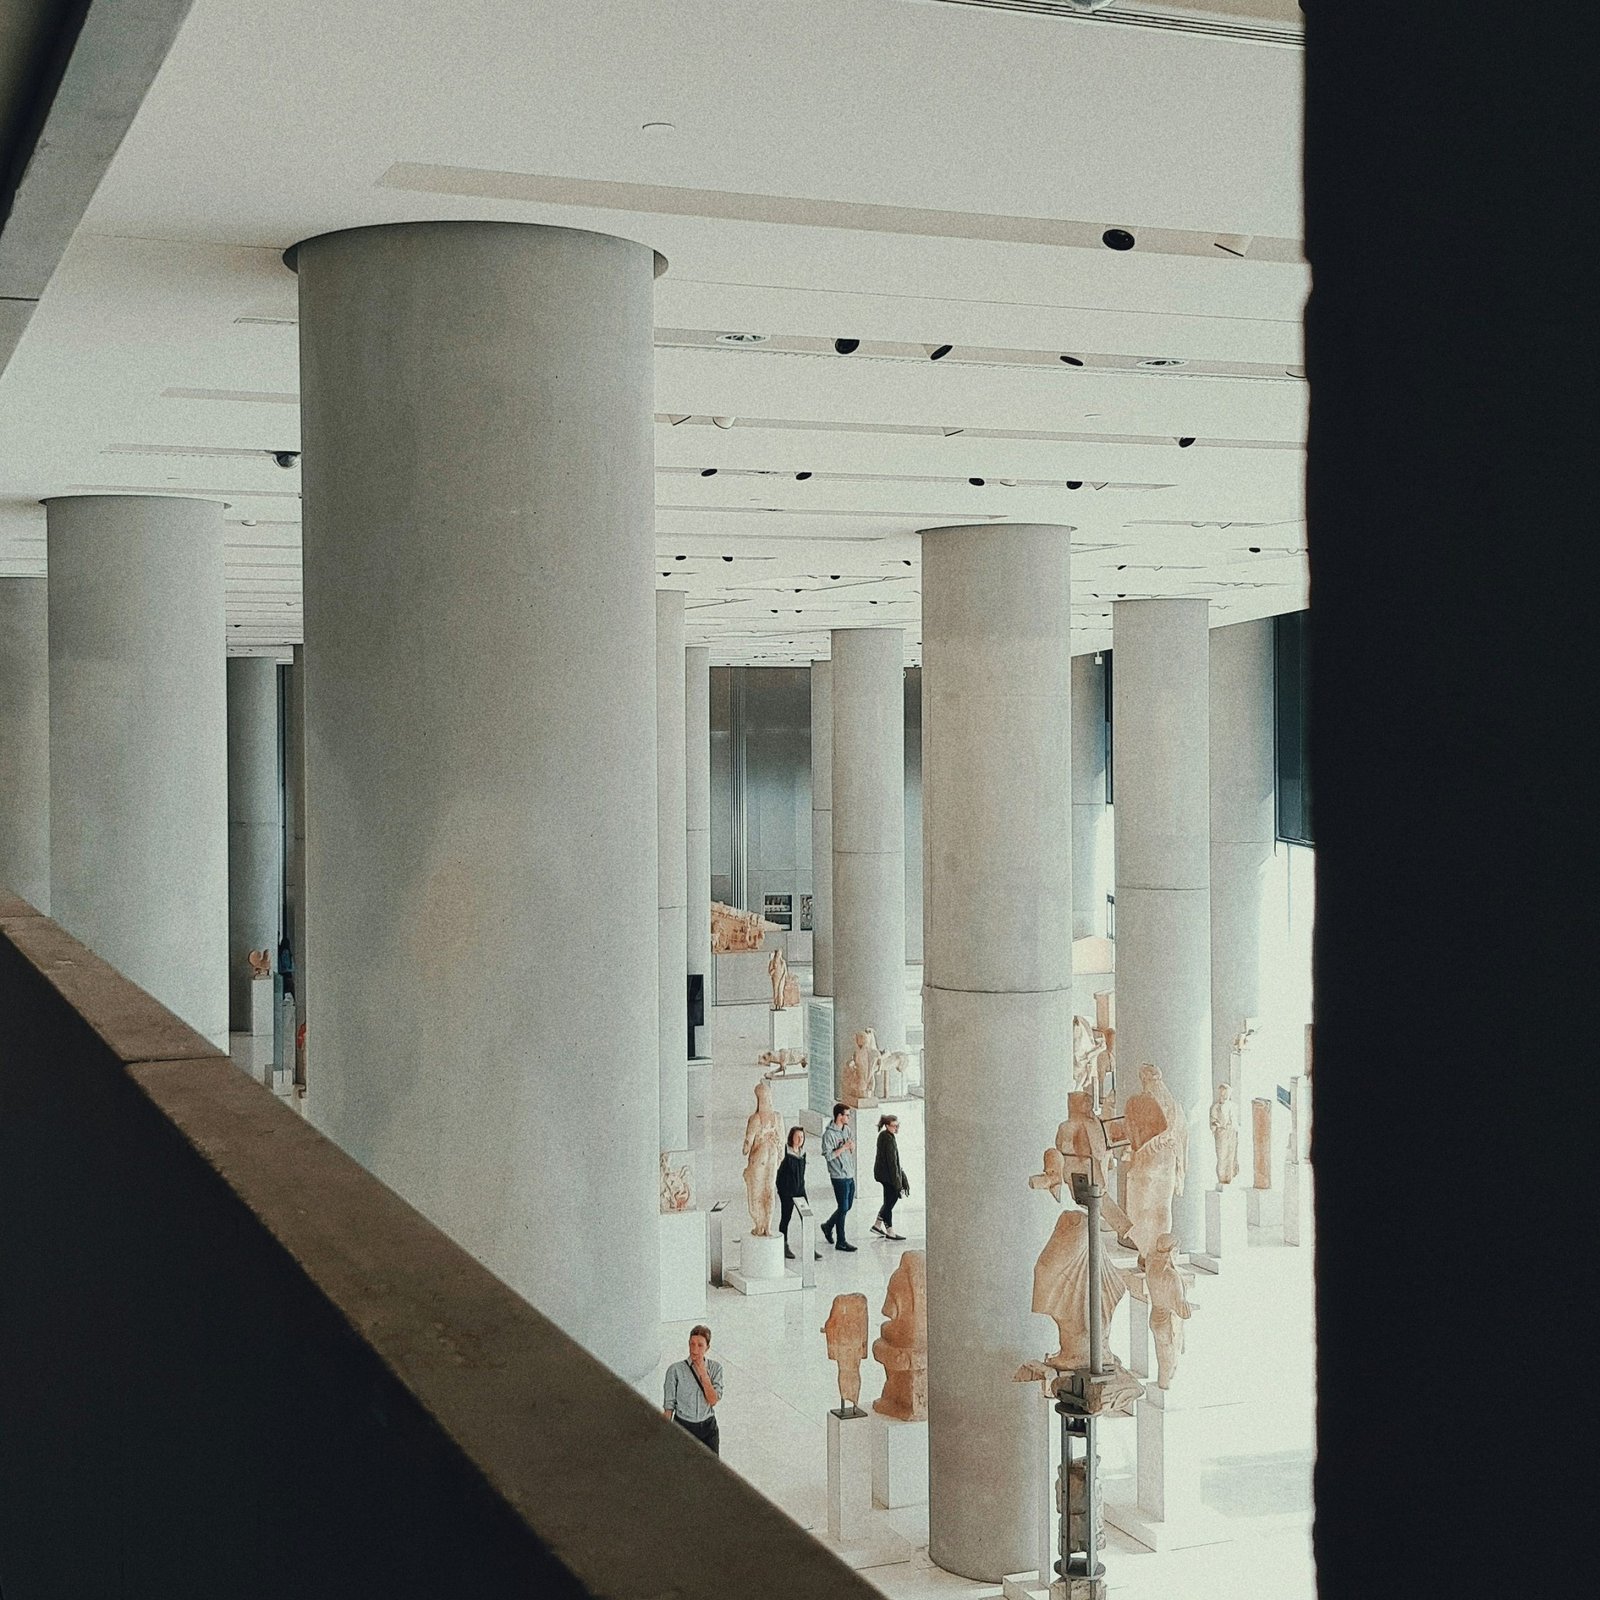 view of people walking inside building with columns